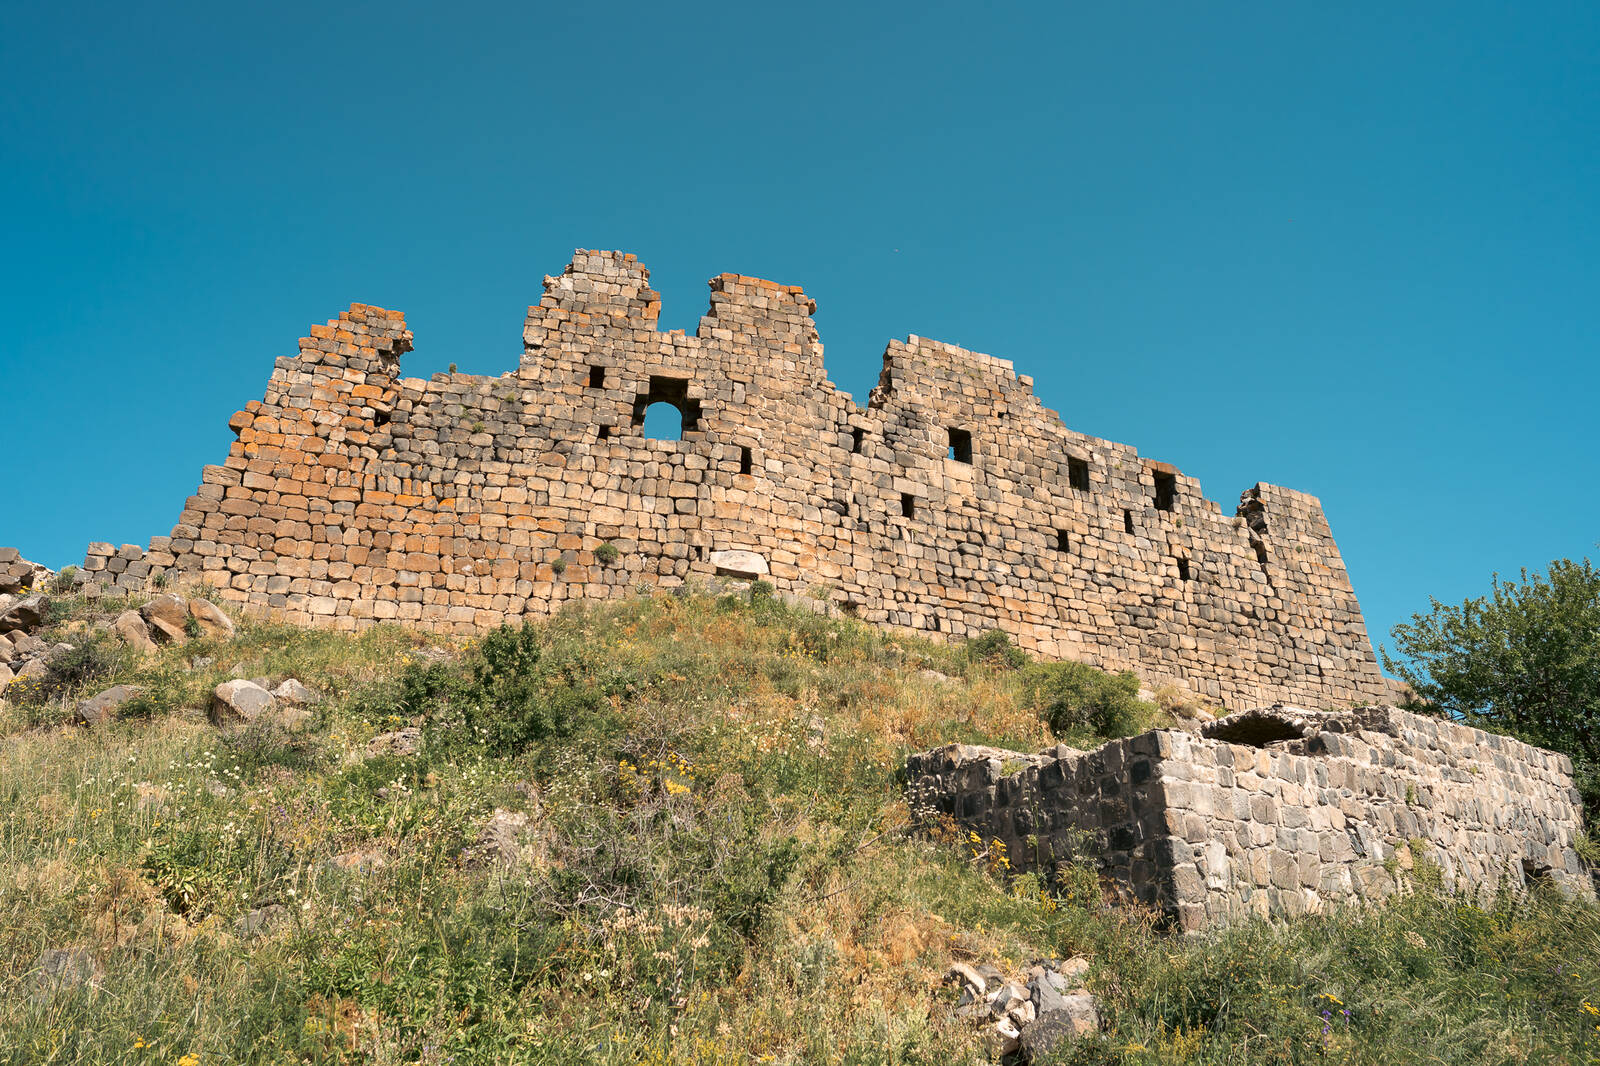 Image of Amberd Fortress and Vahramashen Church by James Billings.